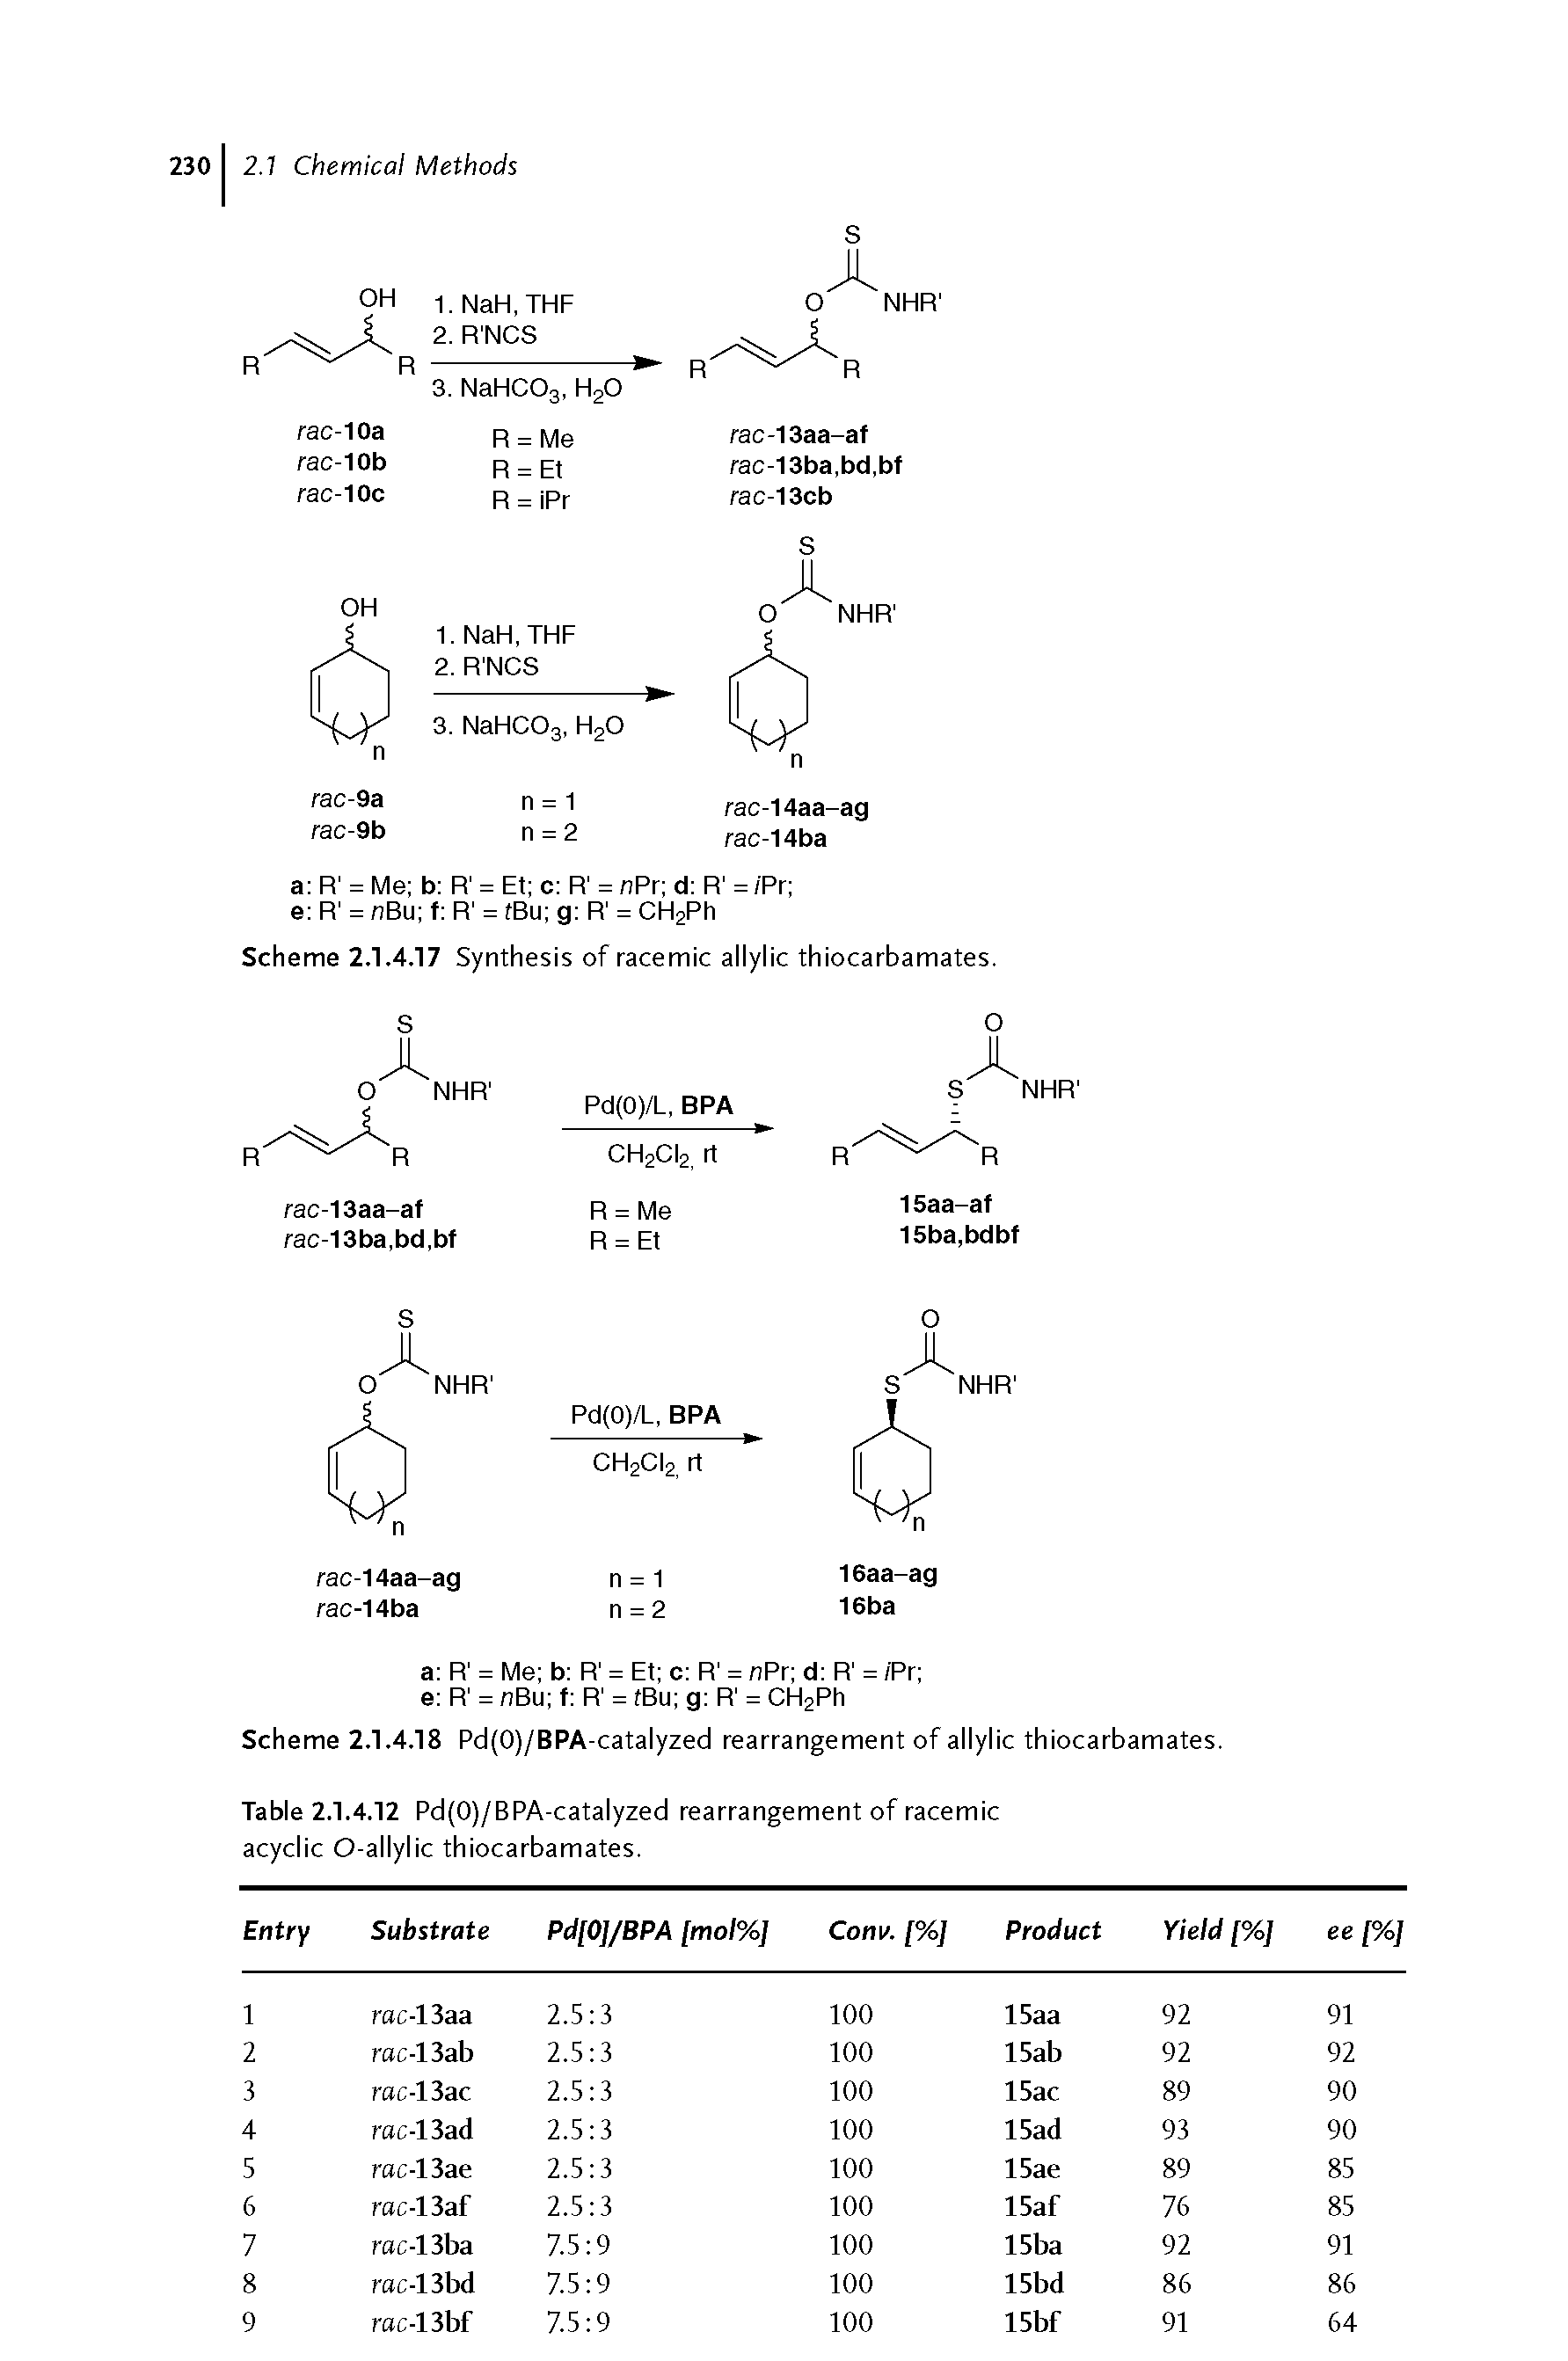 Table 2.1.4.12 Pd(0)/BPA-catalyzed rearrangement of racemic acyclic O-allylic thiocarbamates.